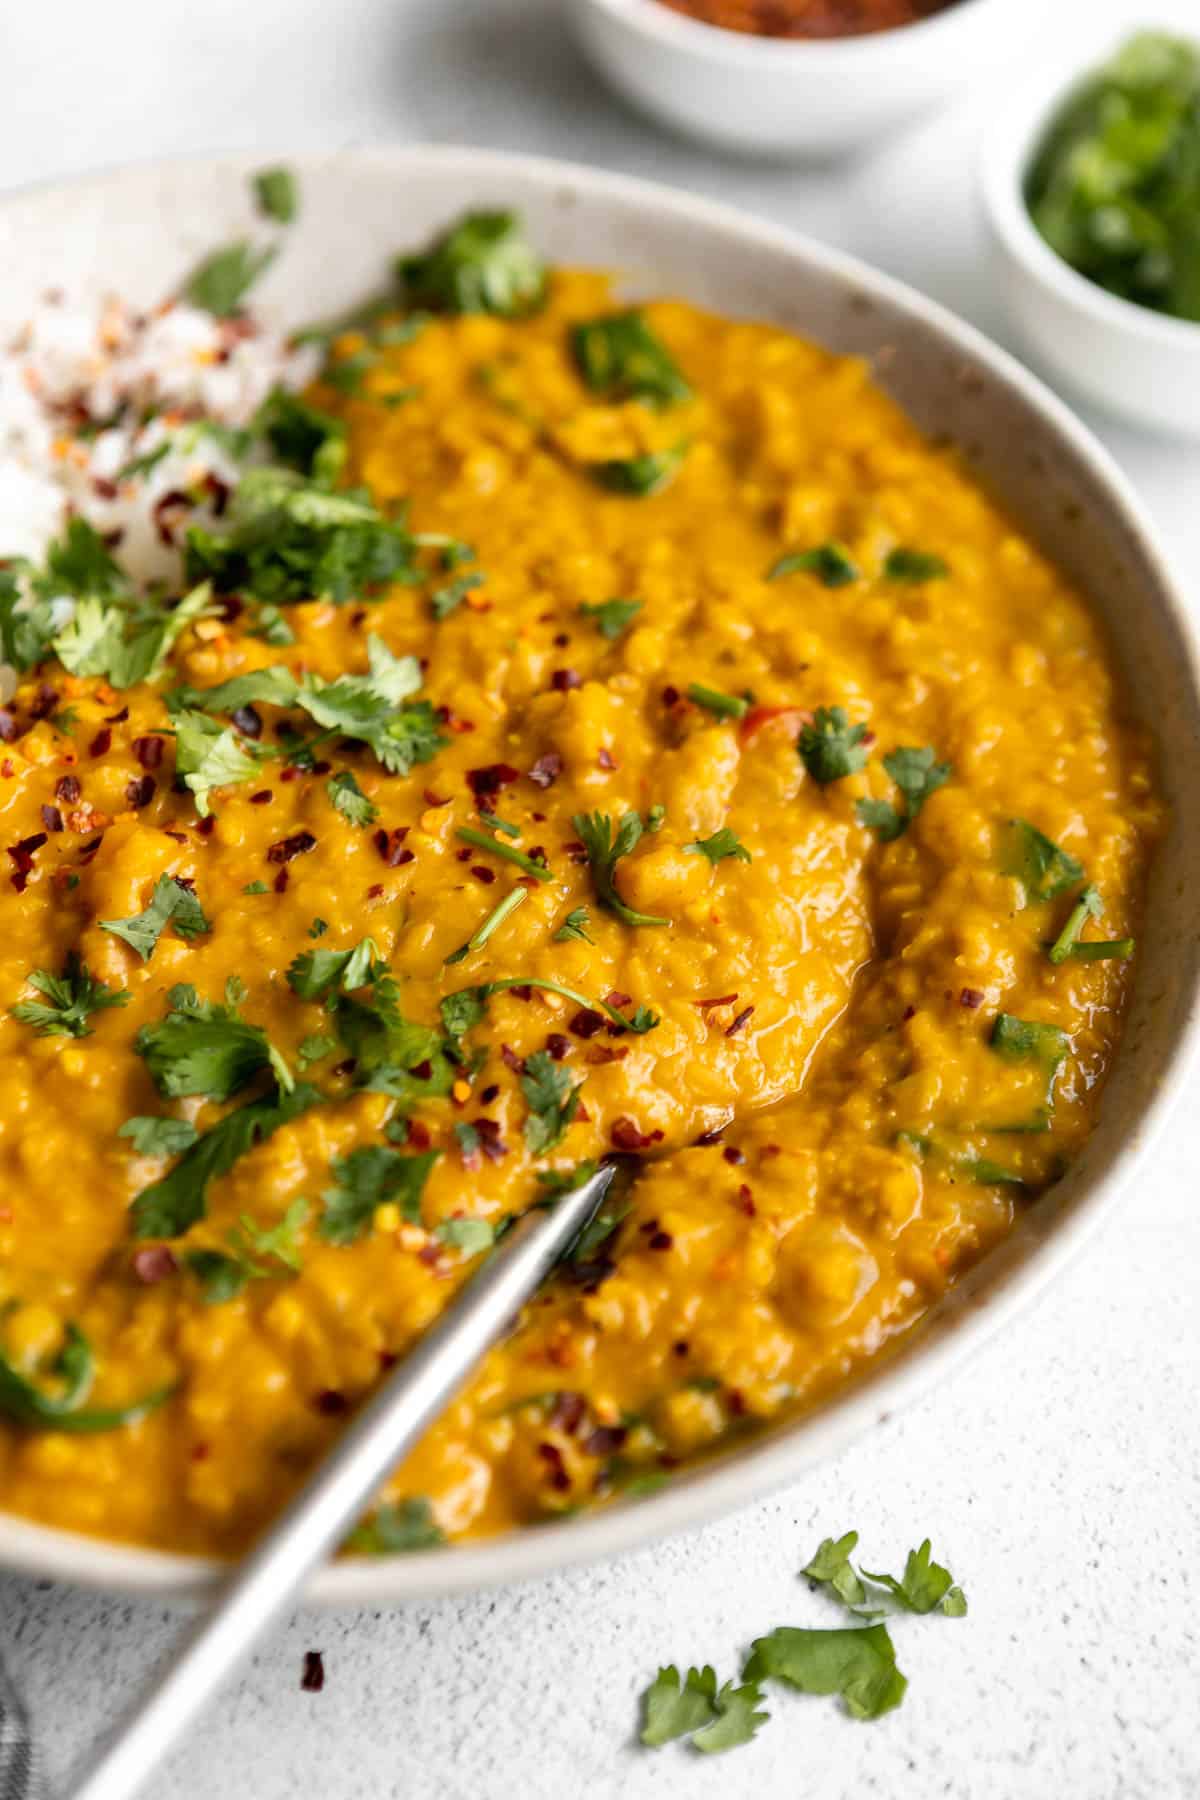 angled view of the red lentil dahl recipe in a bowl